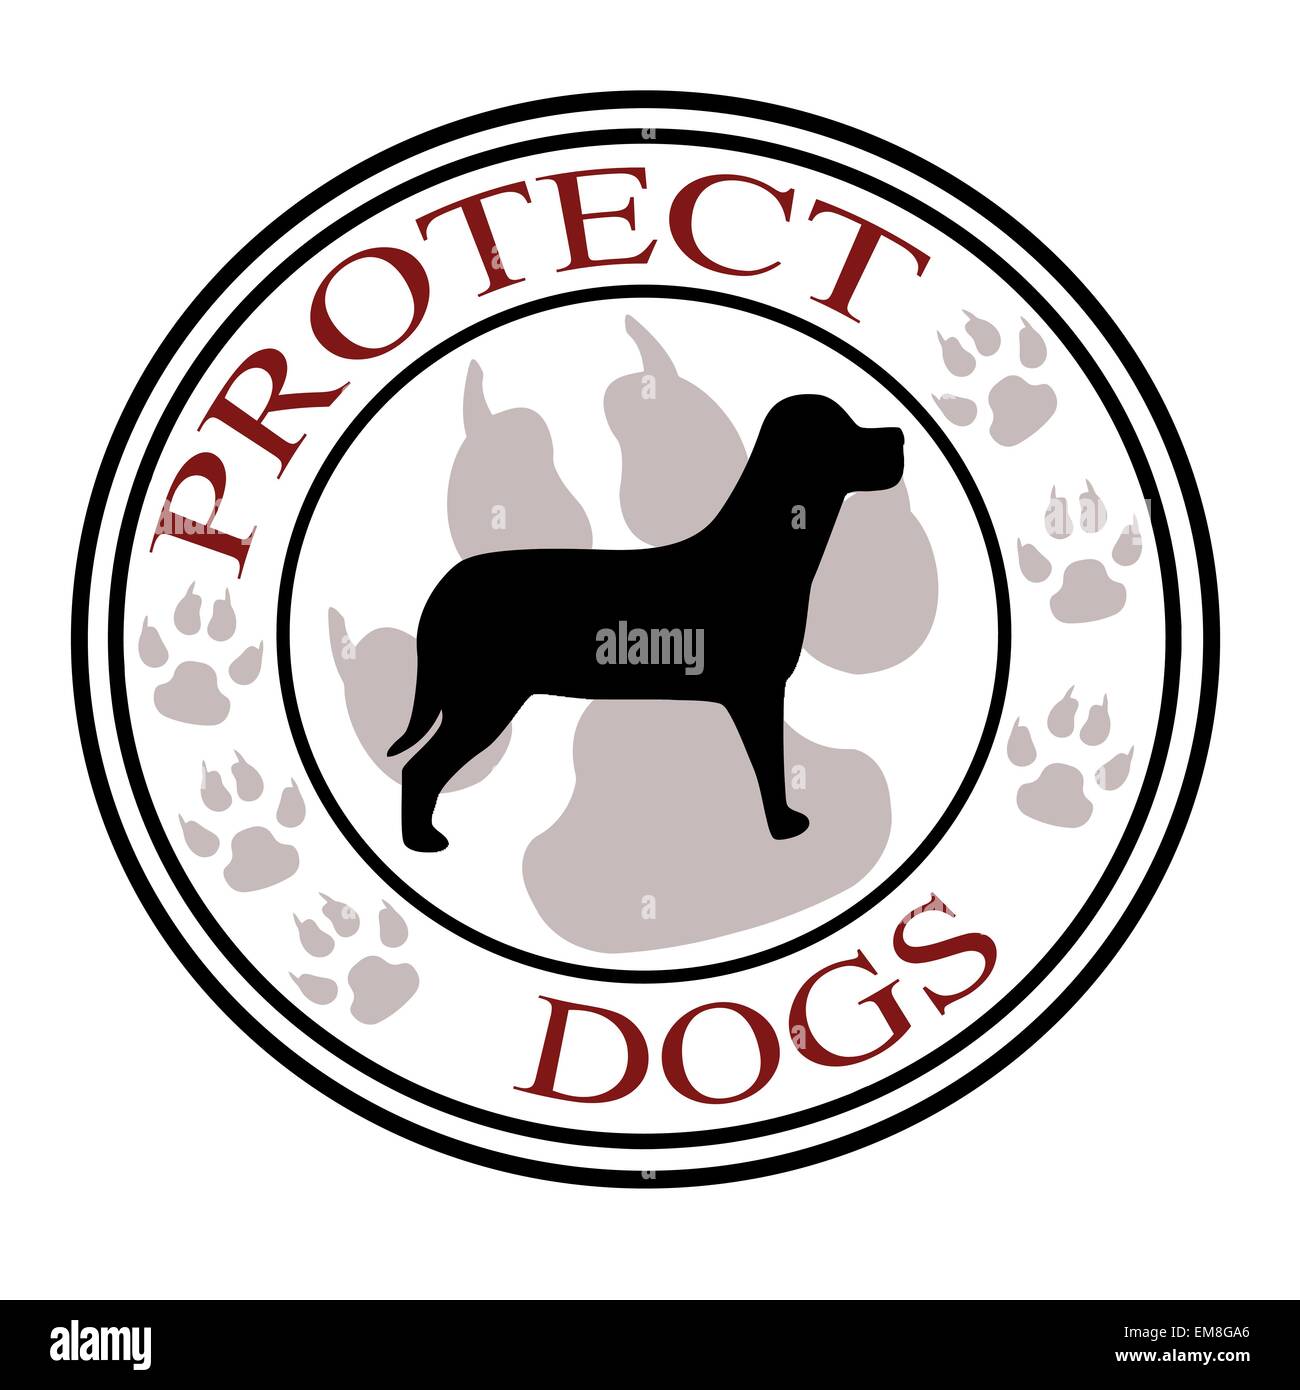 Protect dogs Stock Vector